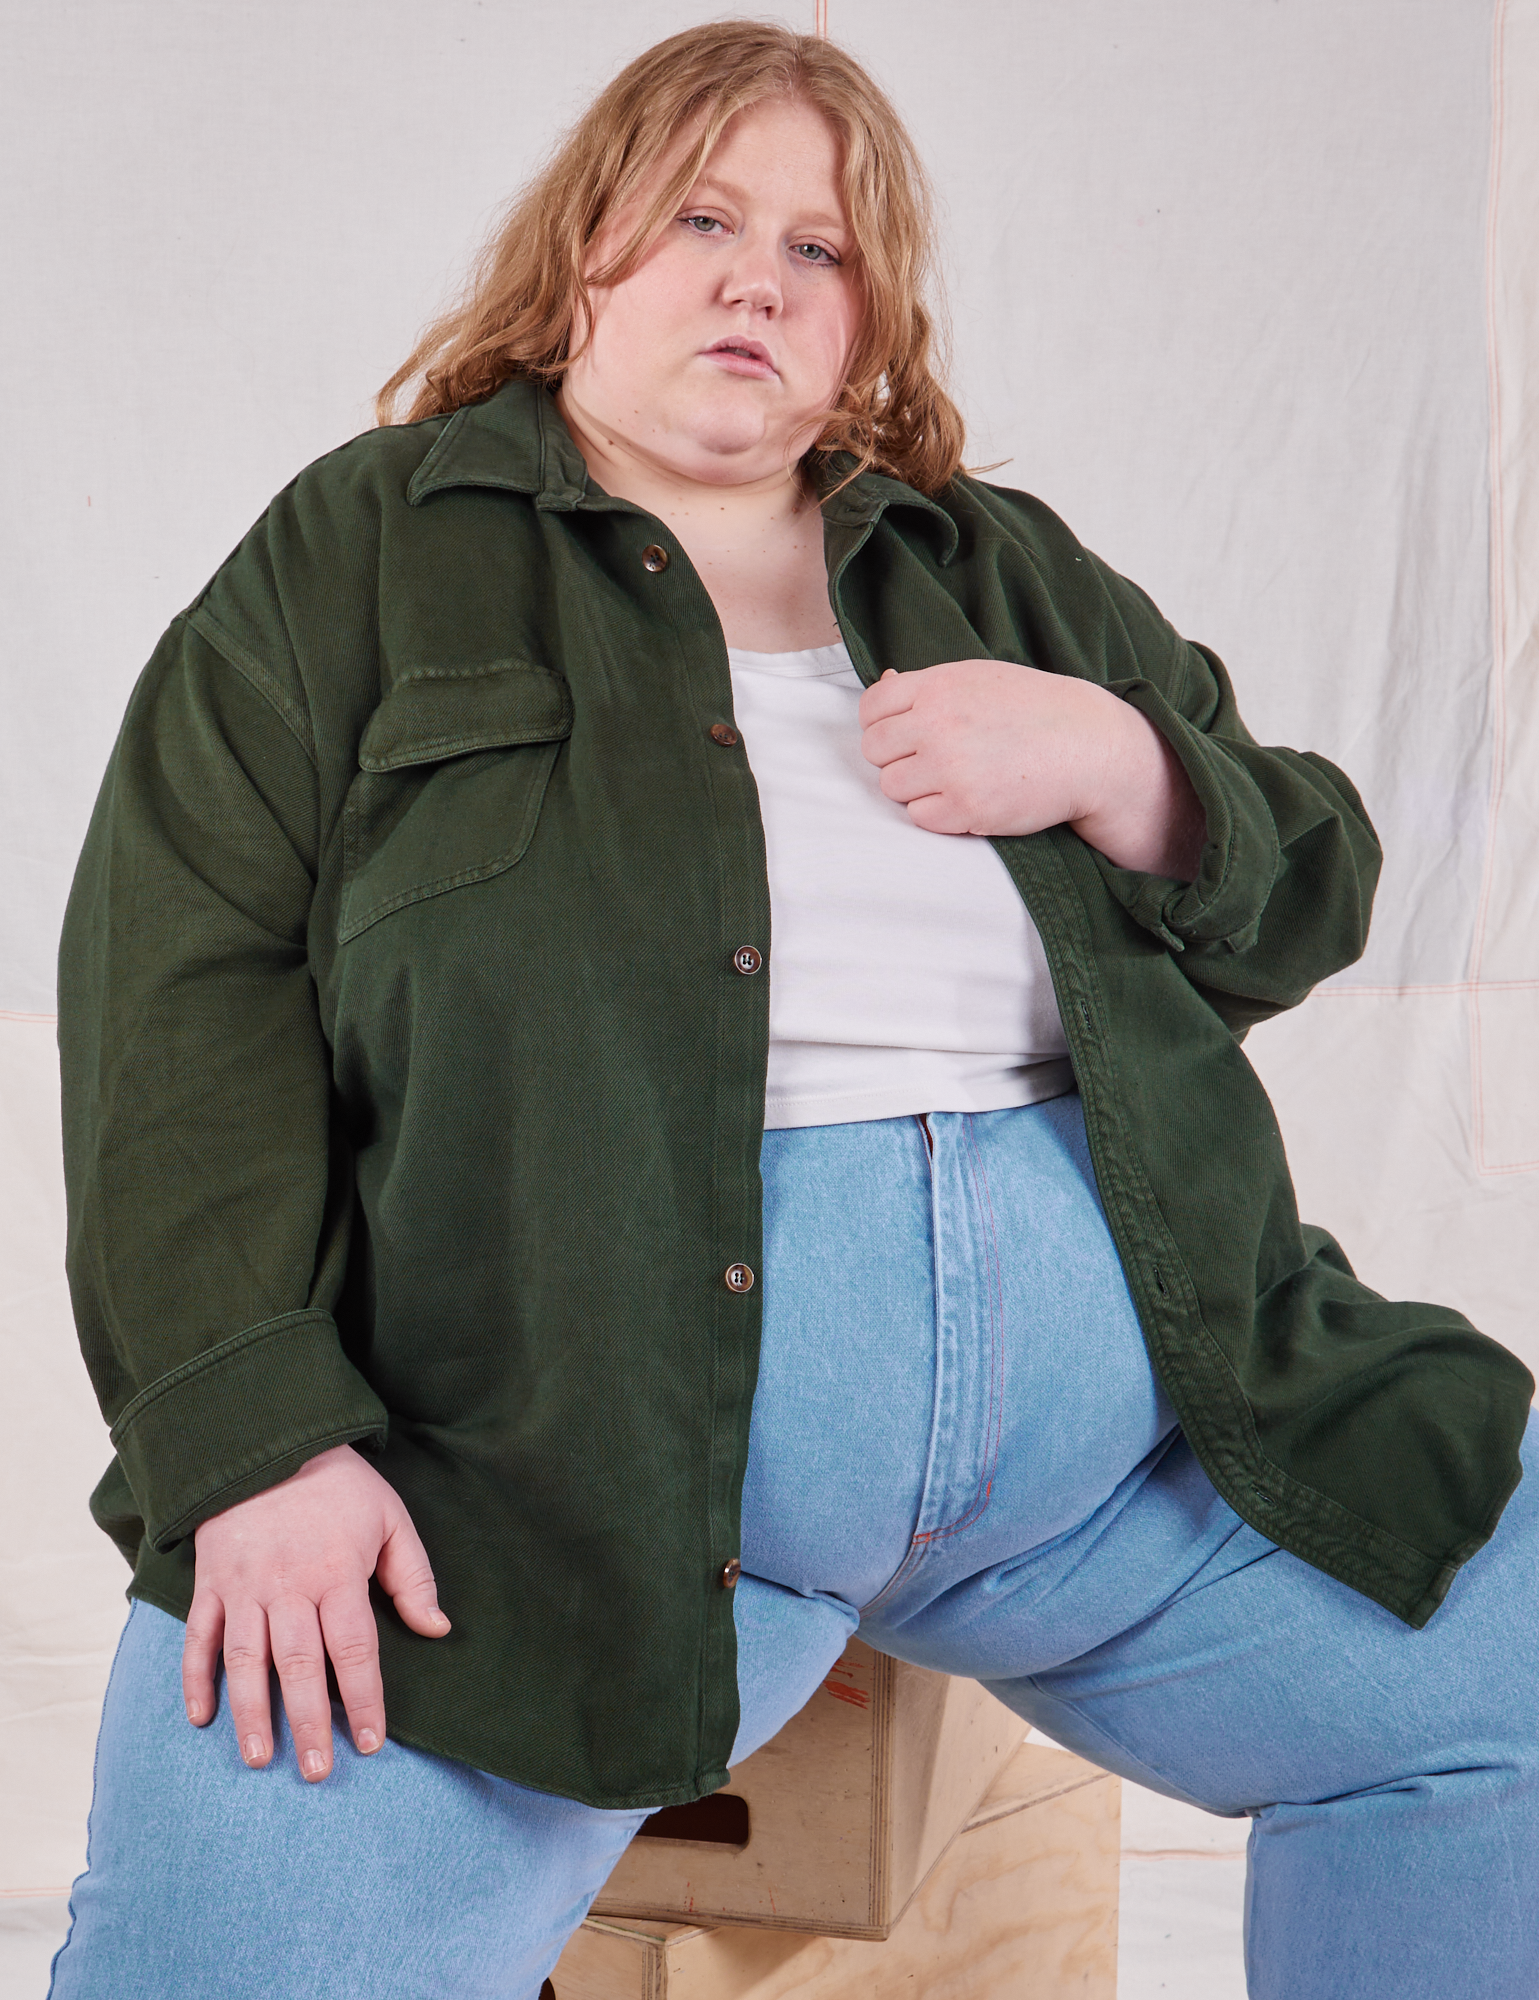 Catie is wearing Flannel Overshirt in Swamp Green and vintage off-white Cropped Tank Top